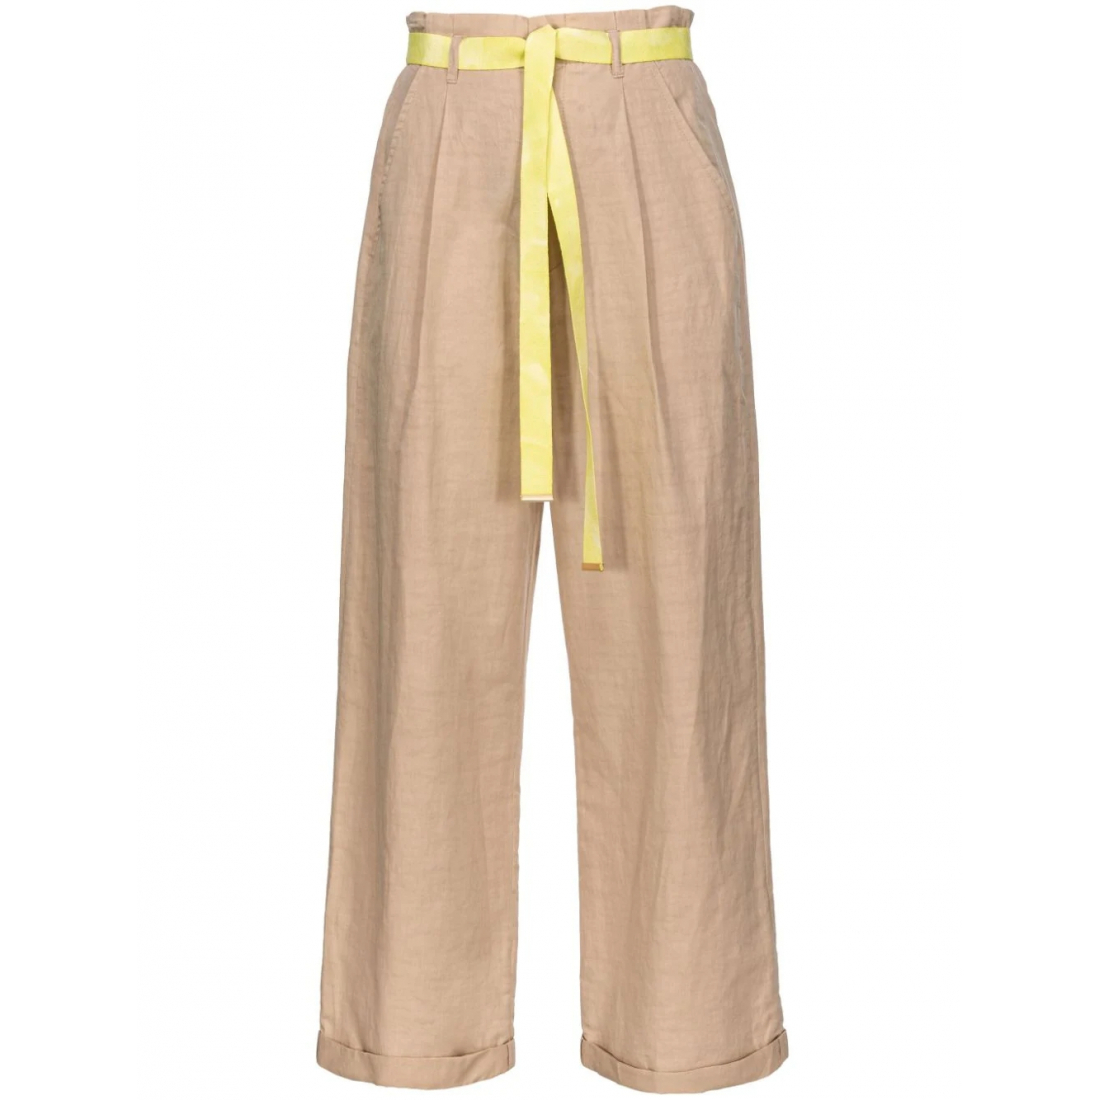 Women's 'Belted' Trousers